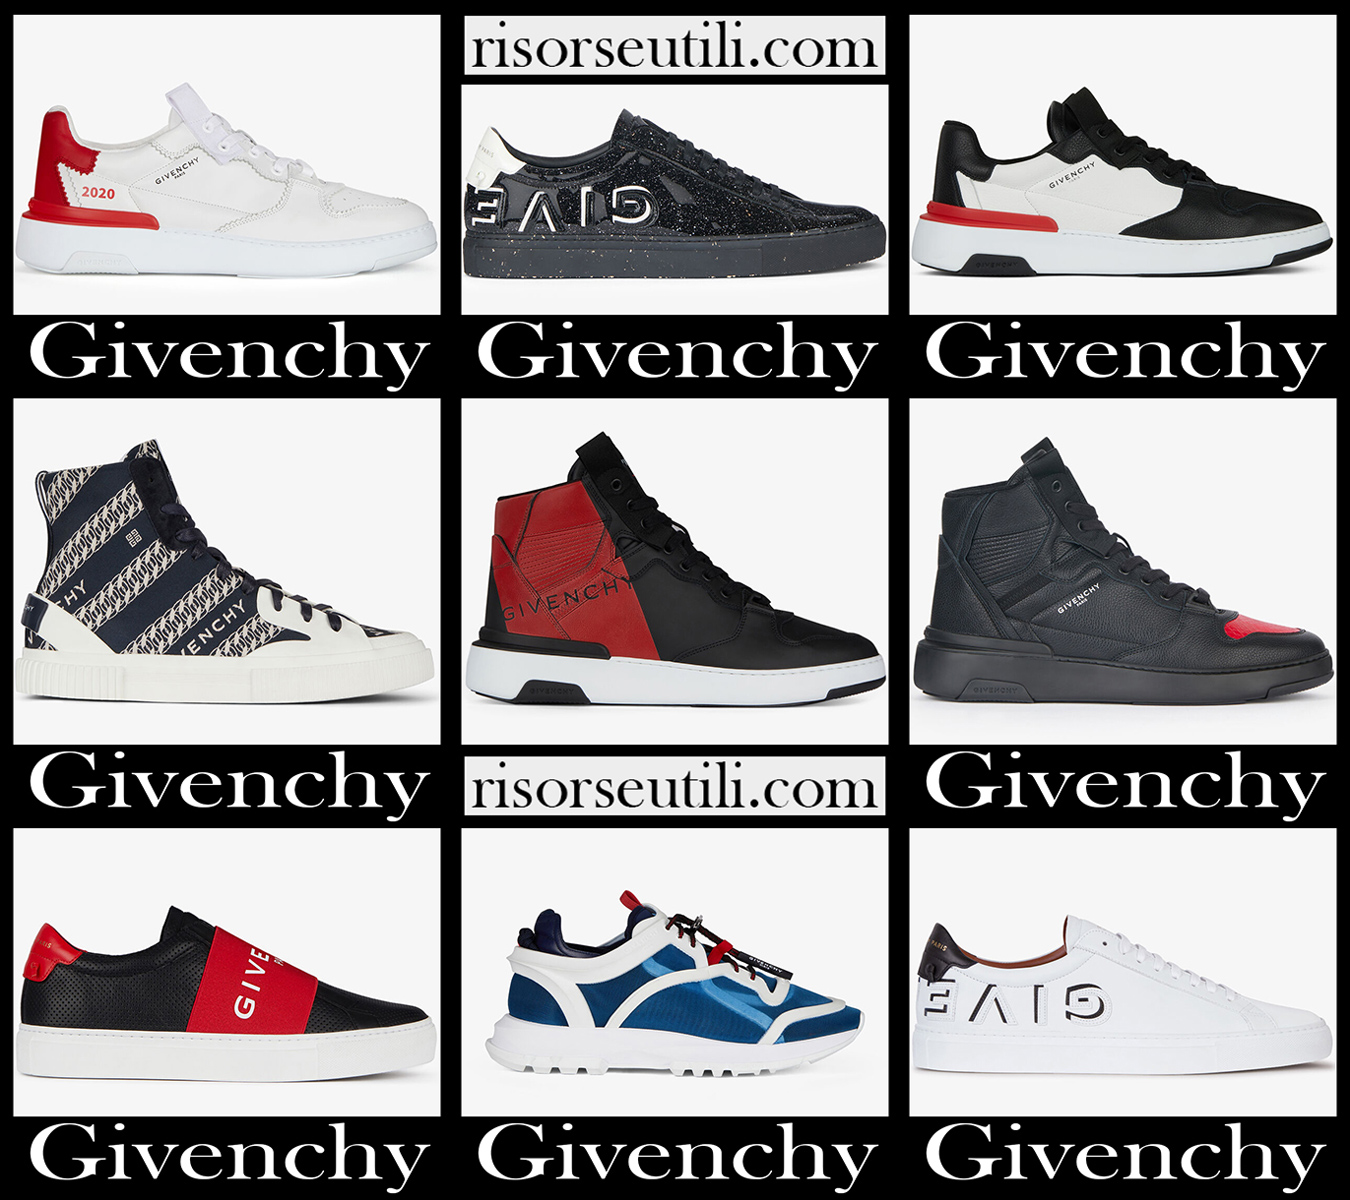 New arrivals Givenchy sneakers 2021 mens shoes